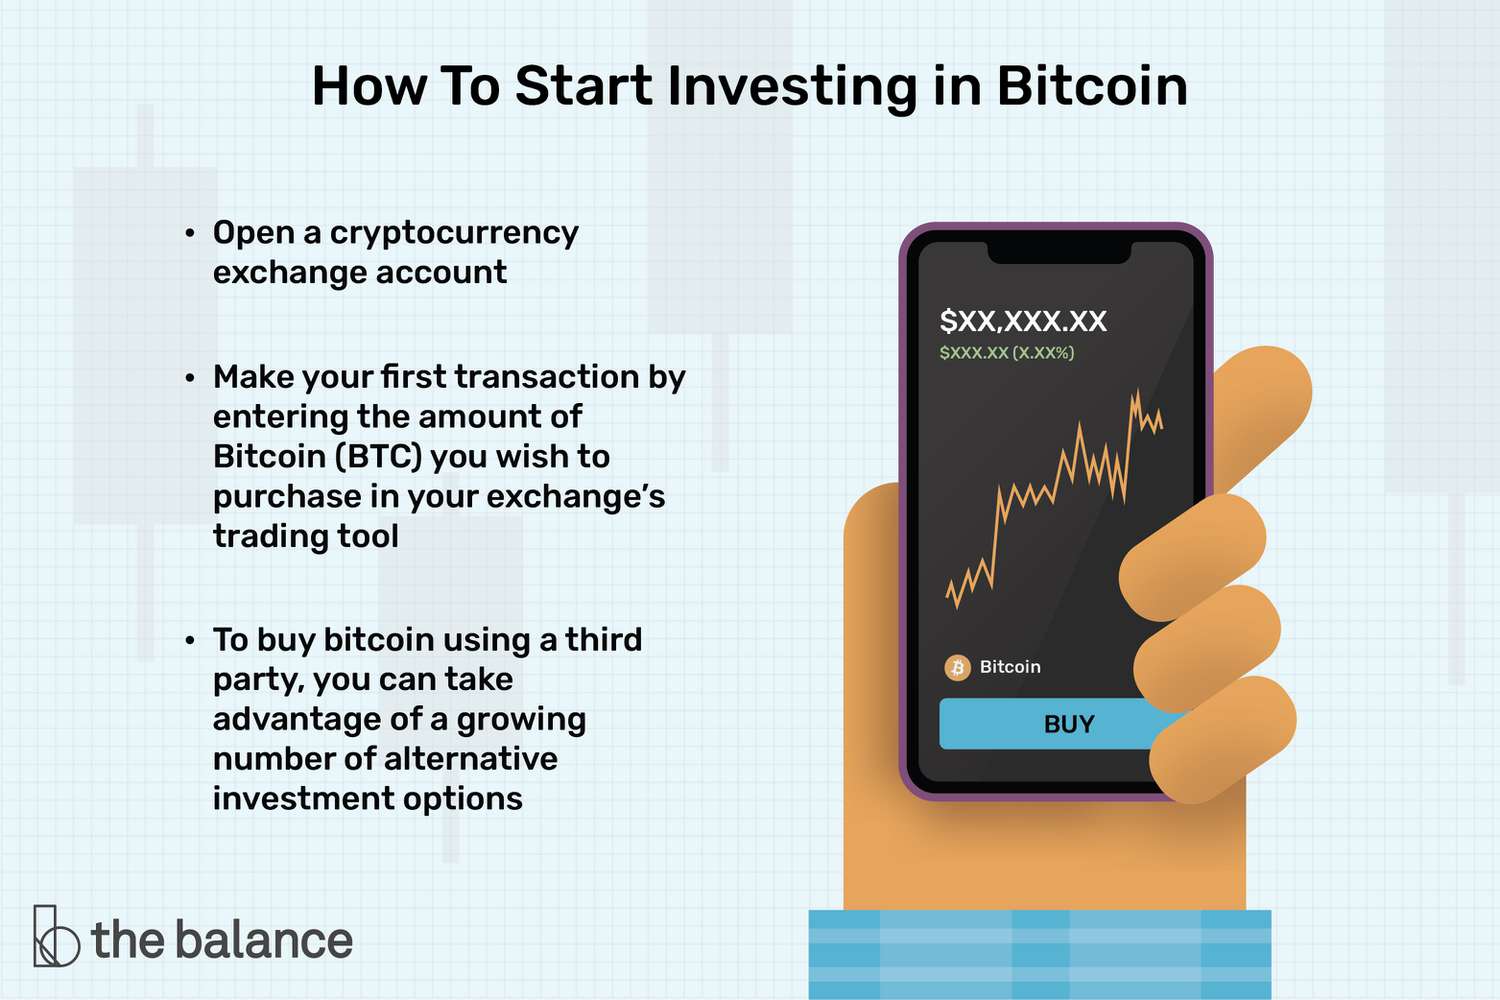 How to buy and earn bitcoin: Guide to wallets, apps, crypto market